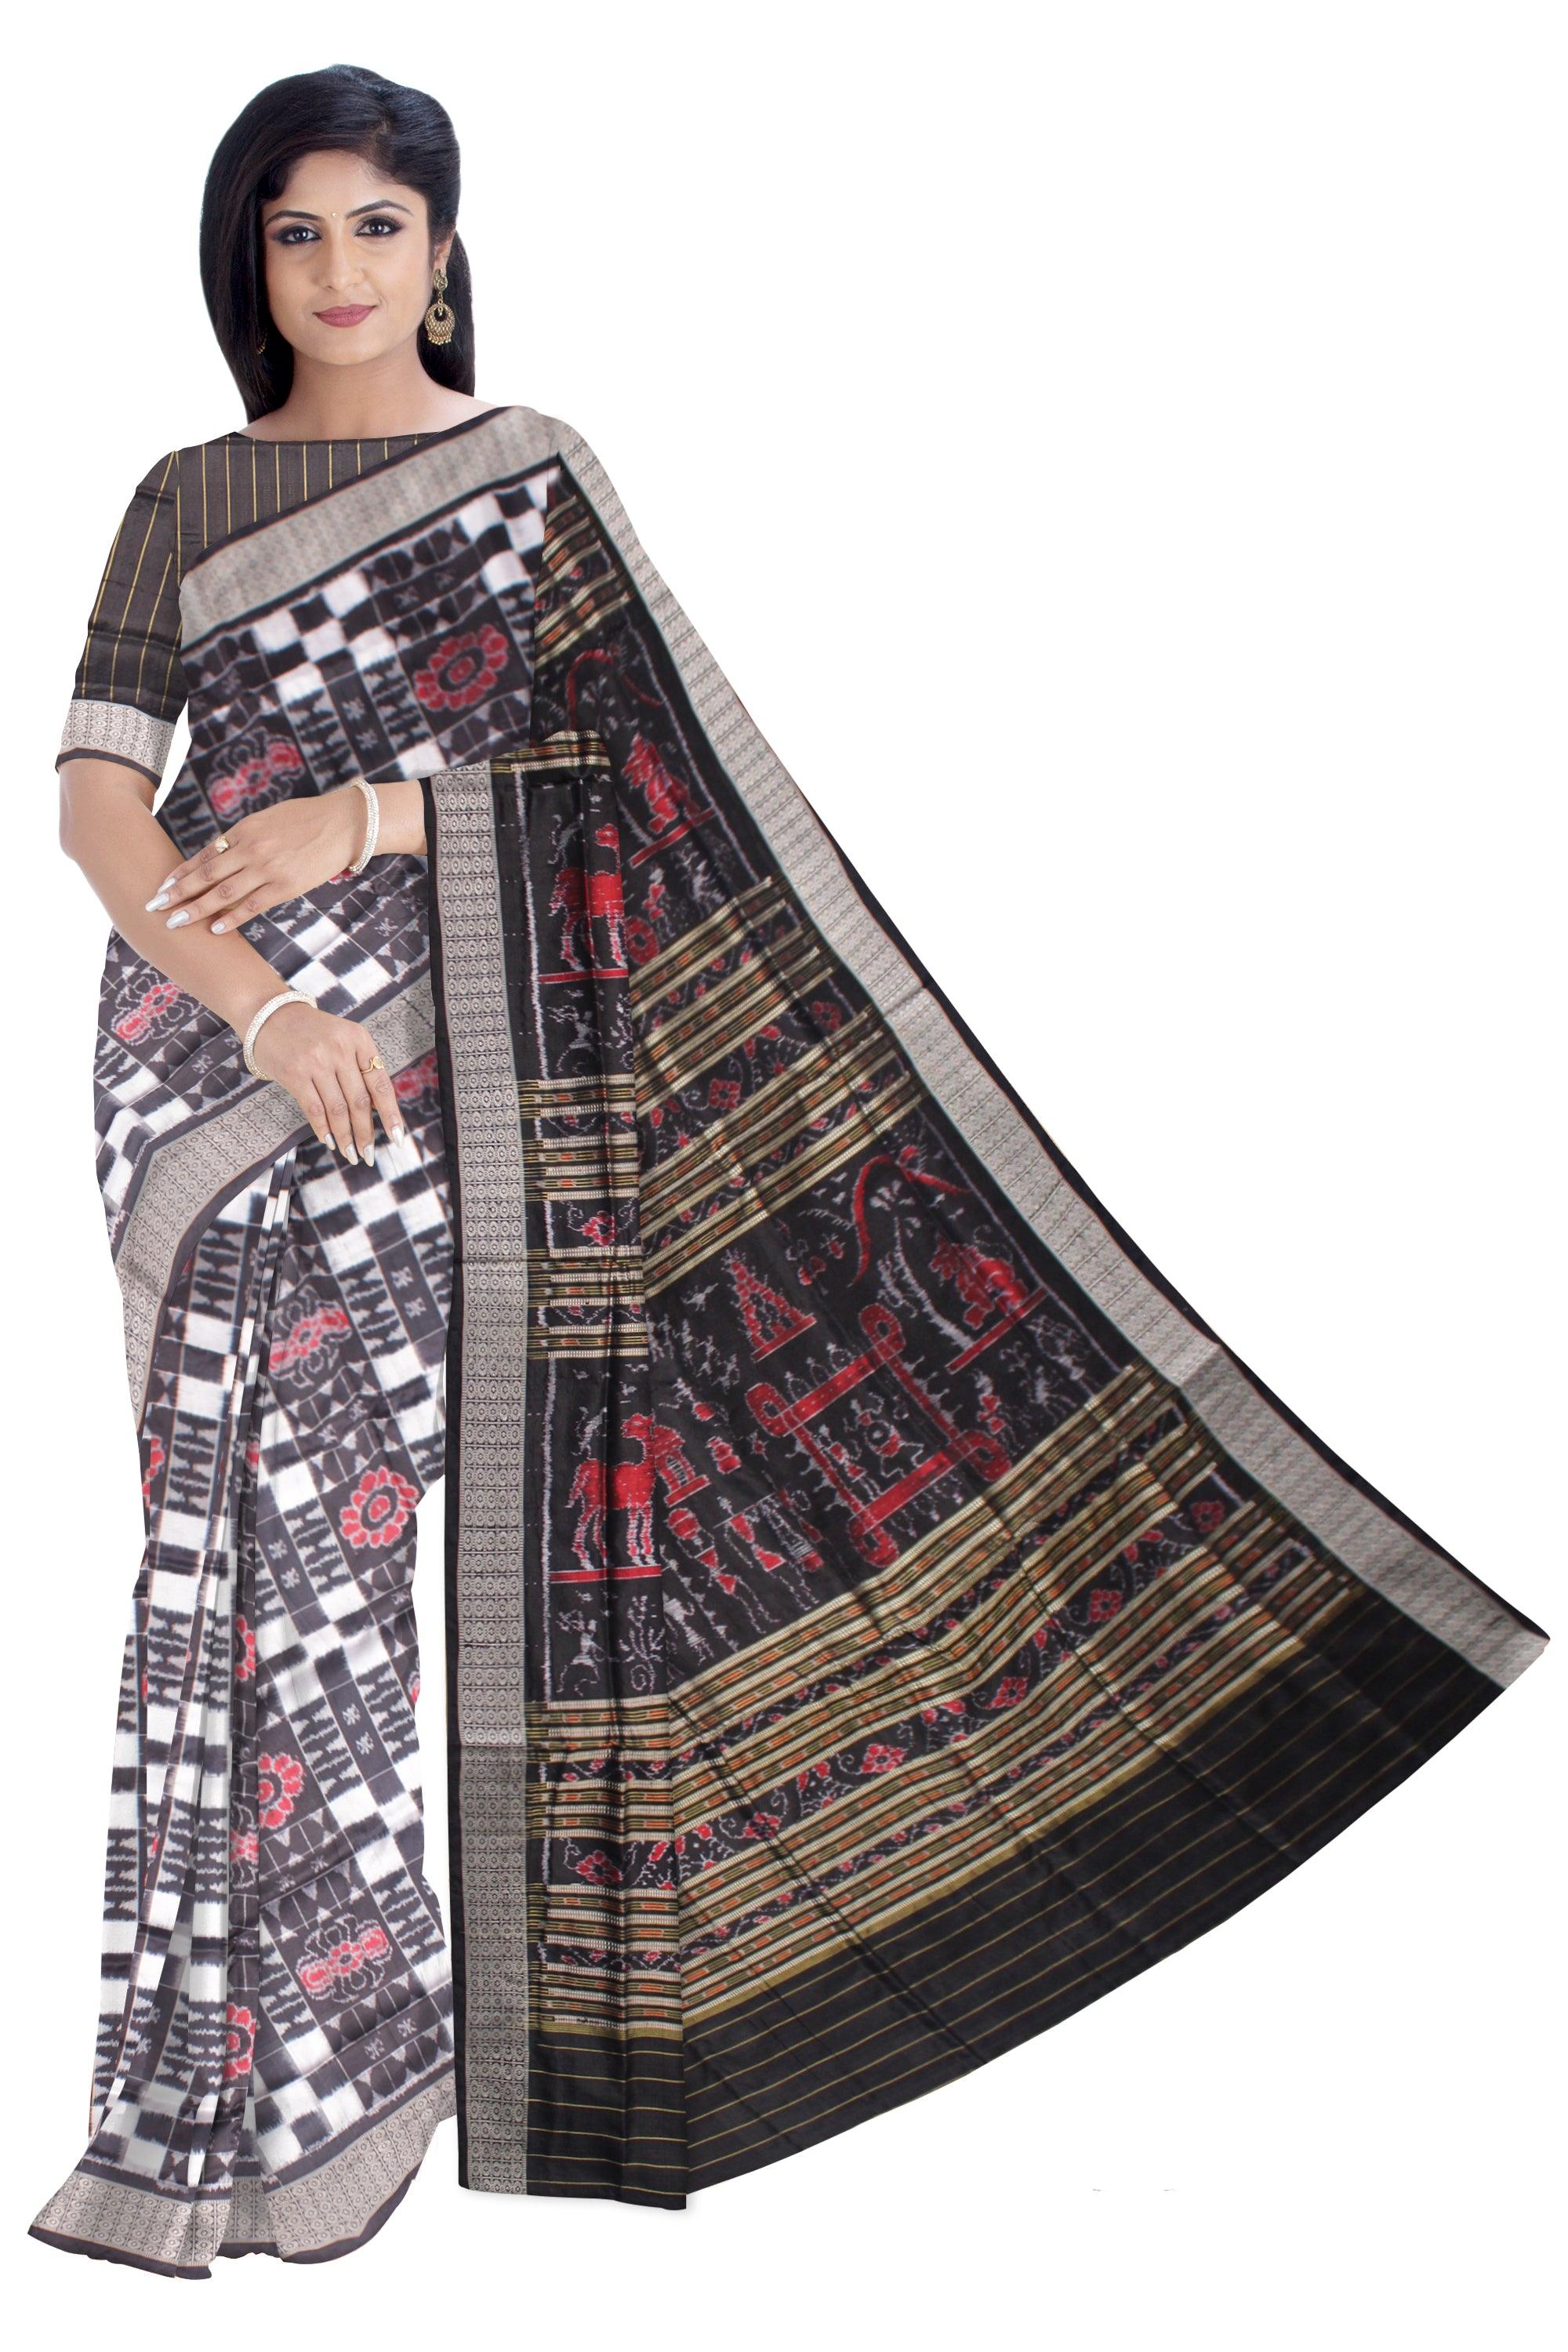 PASAPALI WORK PURE SILK SAREE IS BLACK AND WHITE COLOR BASE, WITH BLOUSE PIECE. - Koshali Arts & Crafts Enterprise